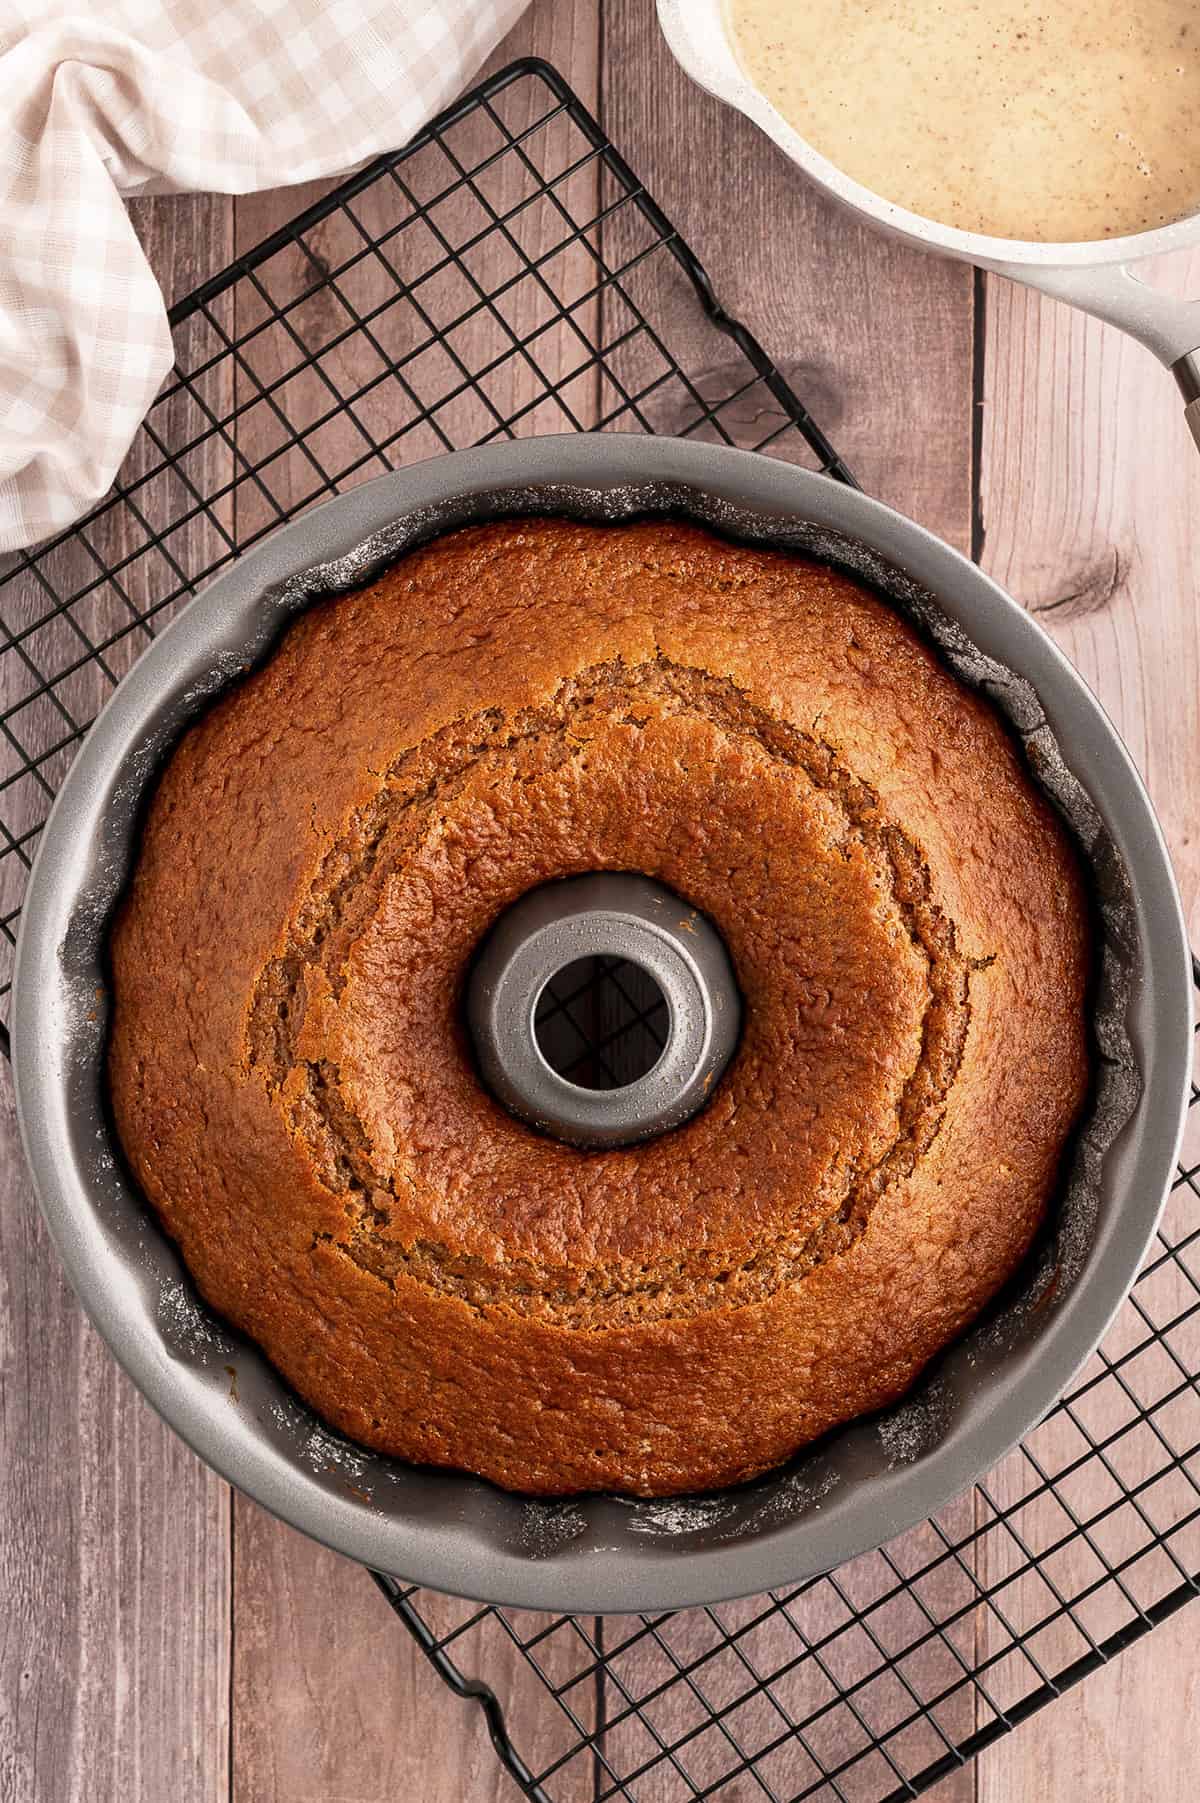 Tips and Tricks for Baking With Bundt Pans